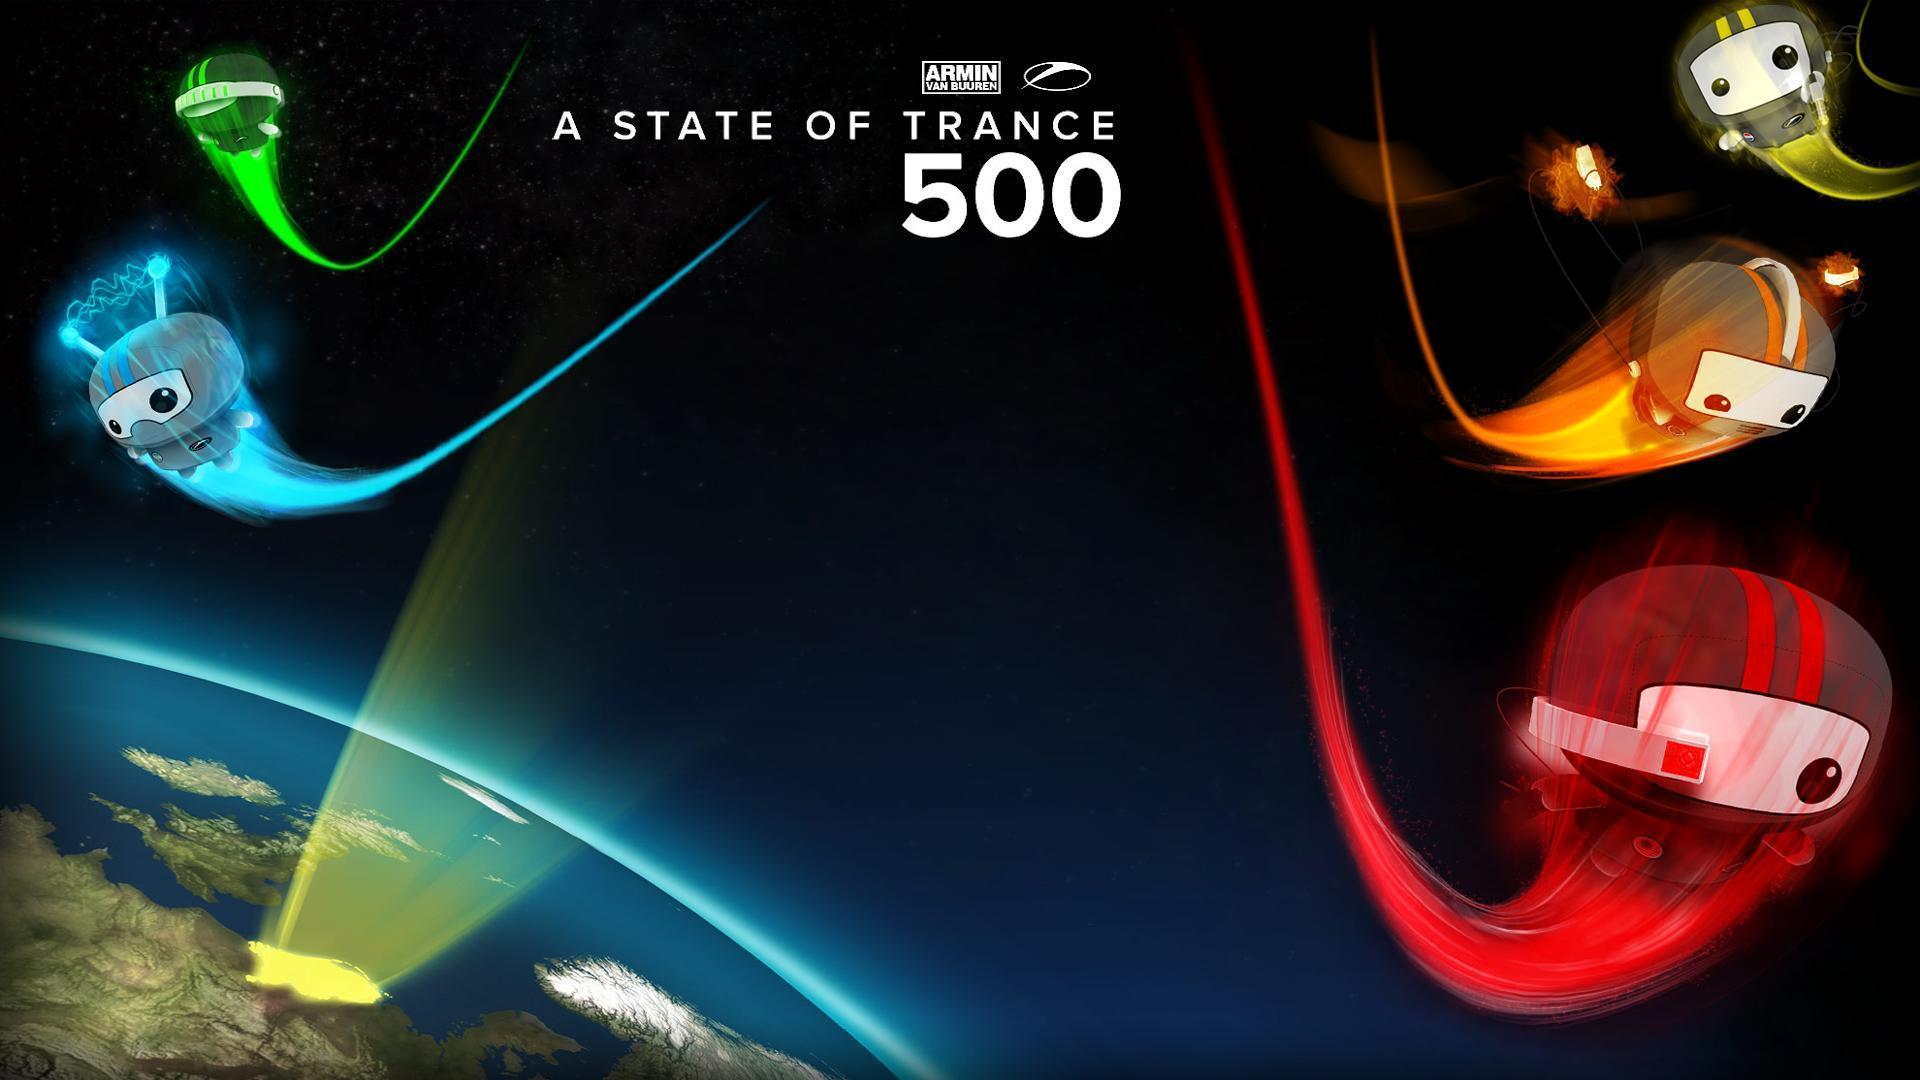 A State Of Trance Wallpapers